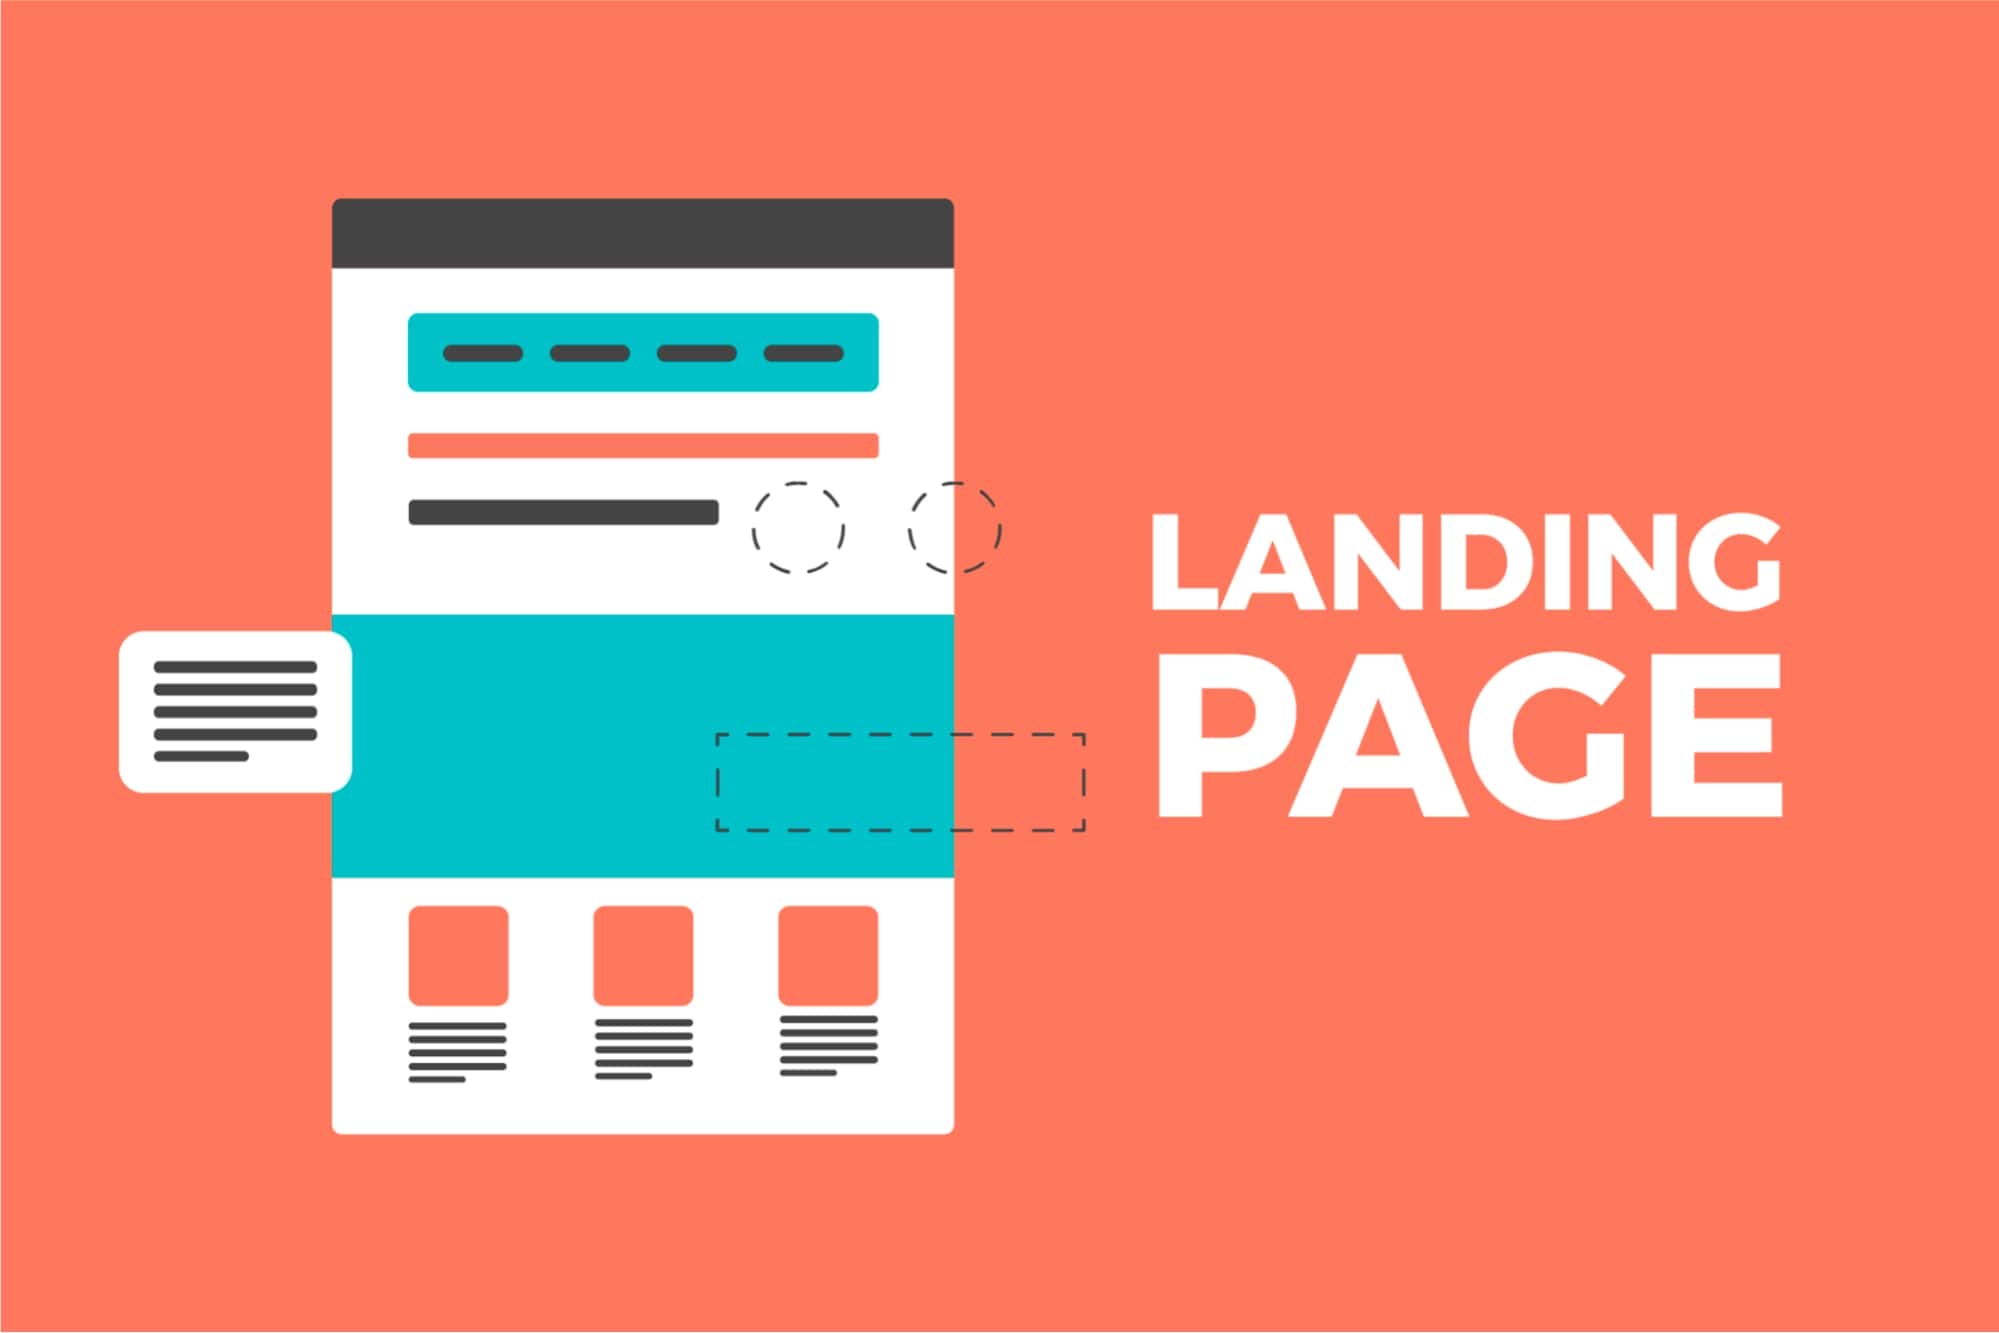 Stop landing visitors on your home page